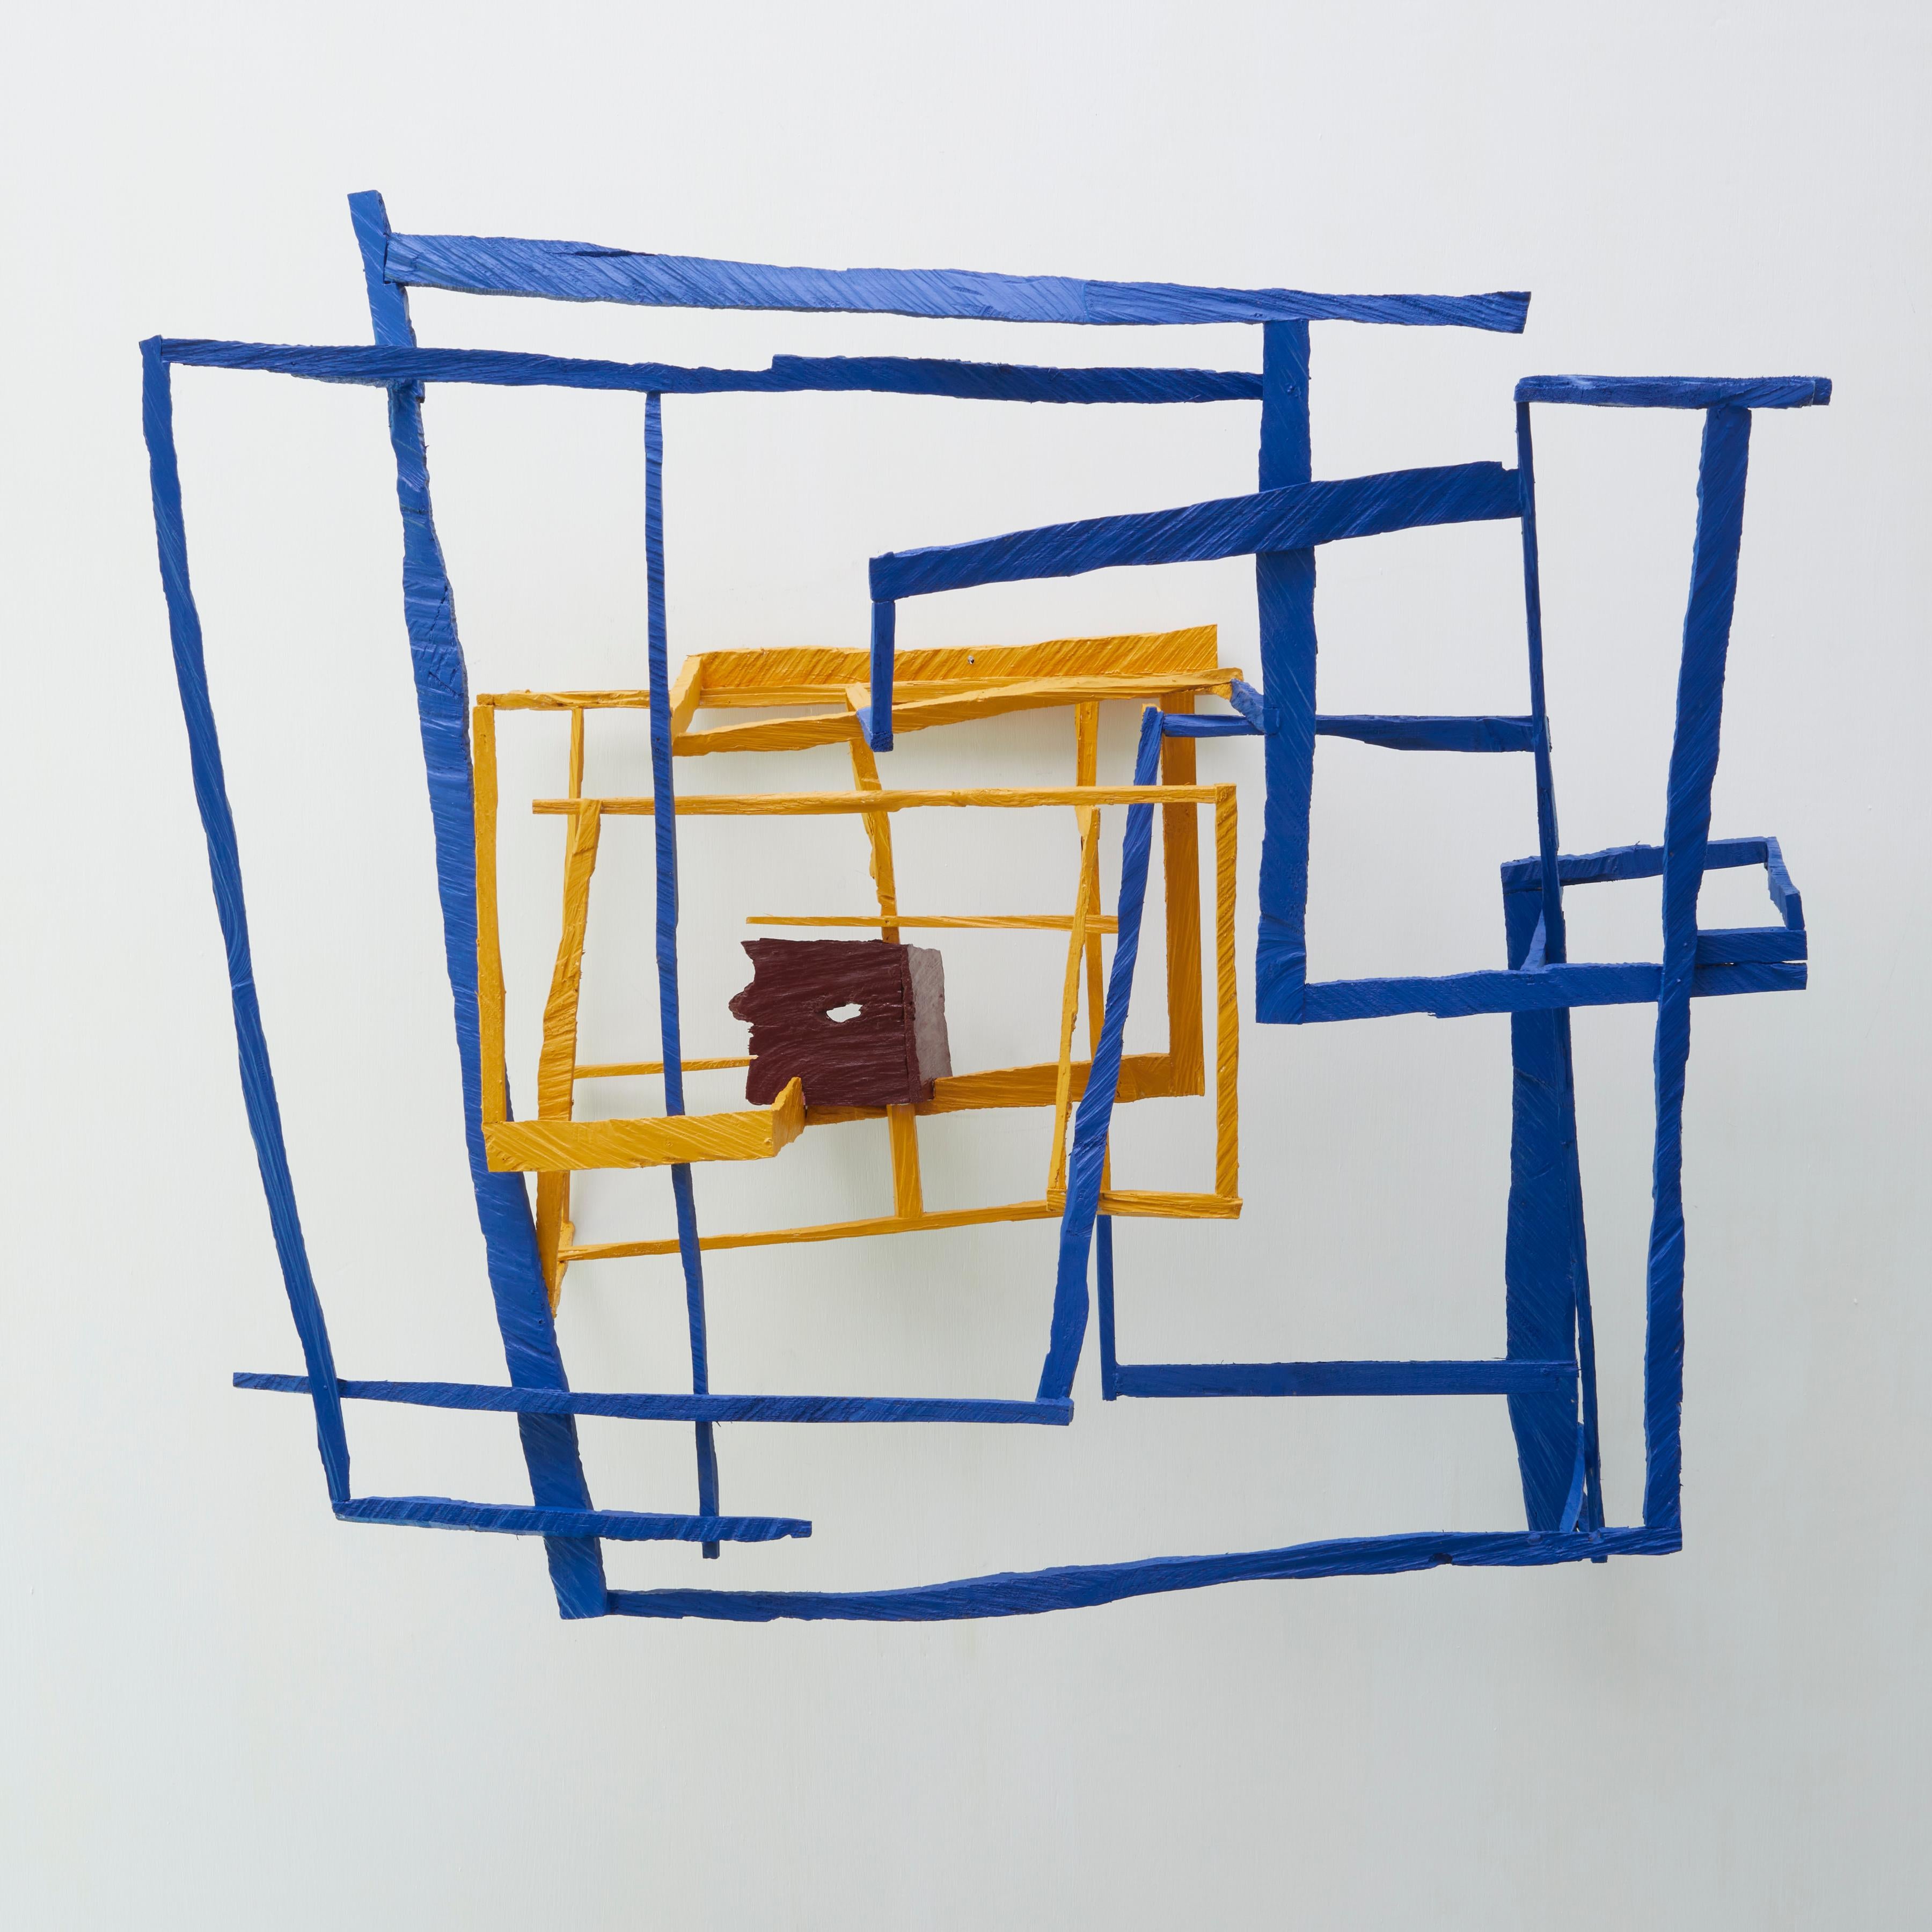 Joe Sultan Abstract Sculpture - No Rain, No Rose, blue and yellow abstract geometric wooden sculpture